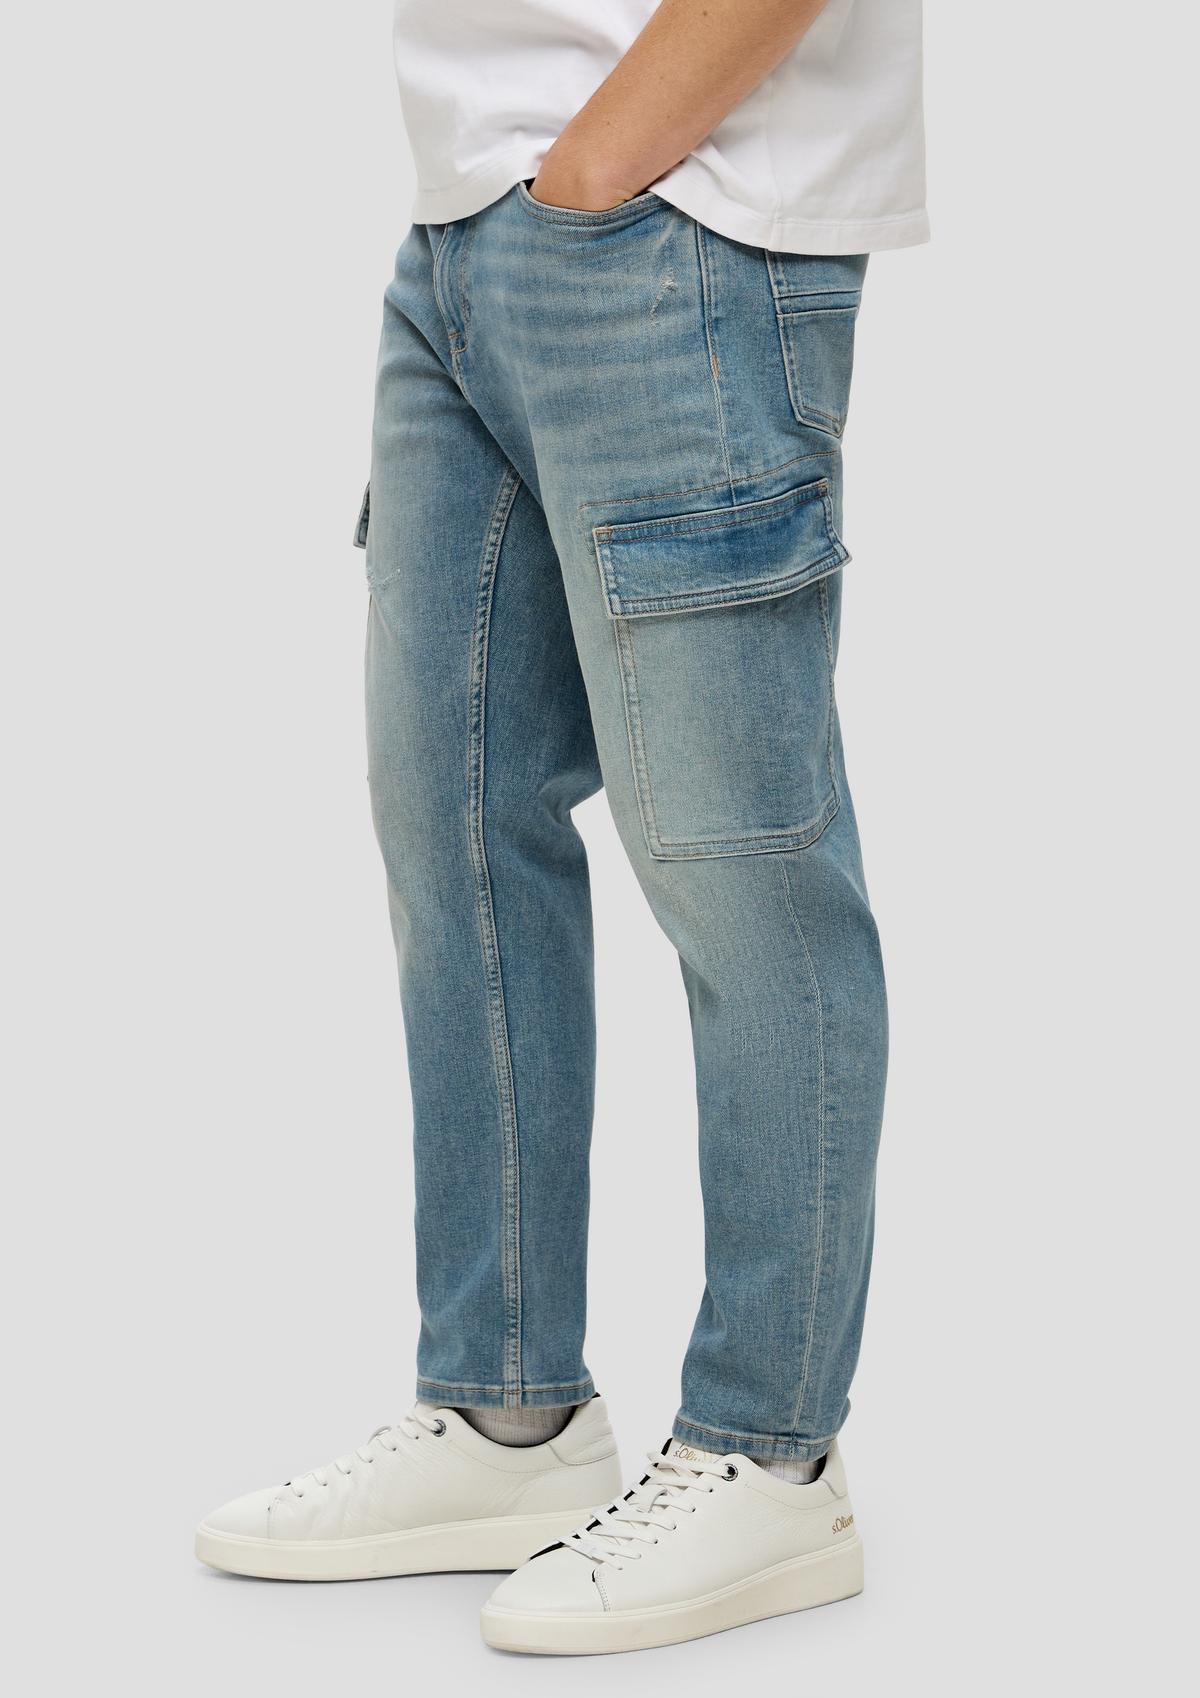 s.Oliver Scube jeans / relaxed fit / high rise / straight leg